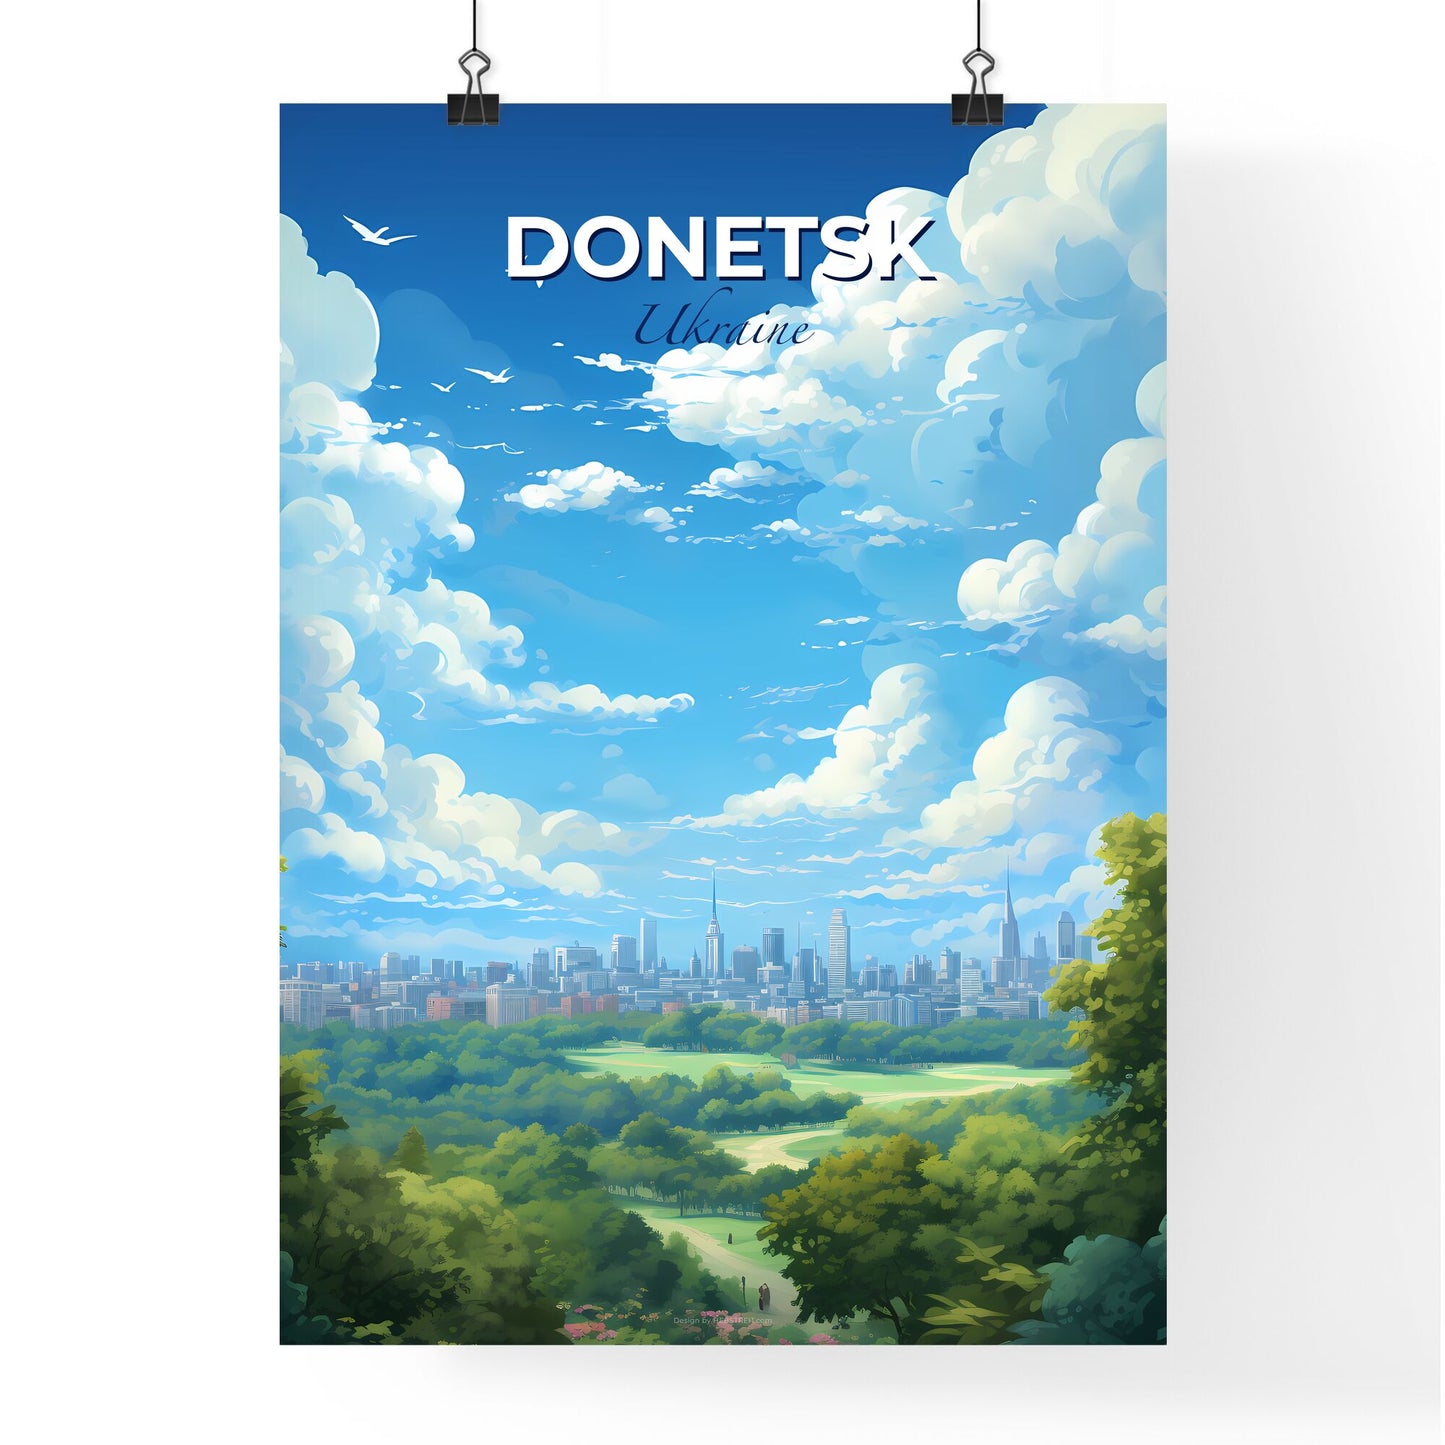 Donetsk Ukraine Skyline - A City Landscape With Trees And Clouds - Customizable Travel Gift Default Title